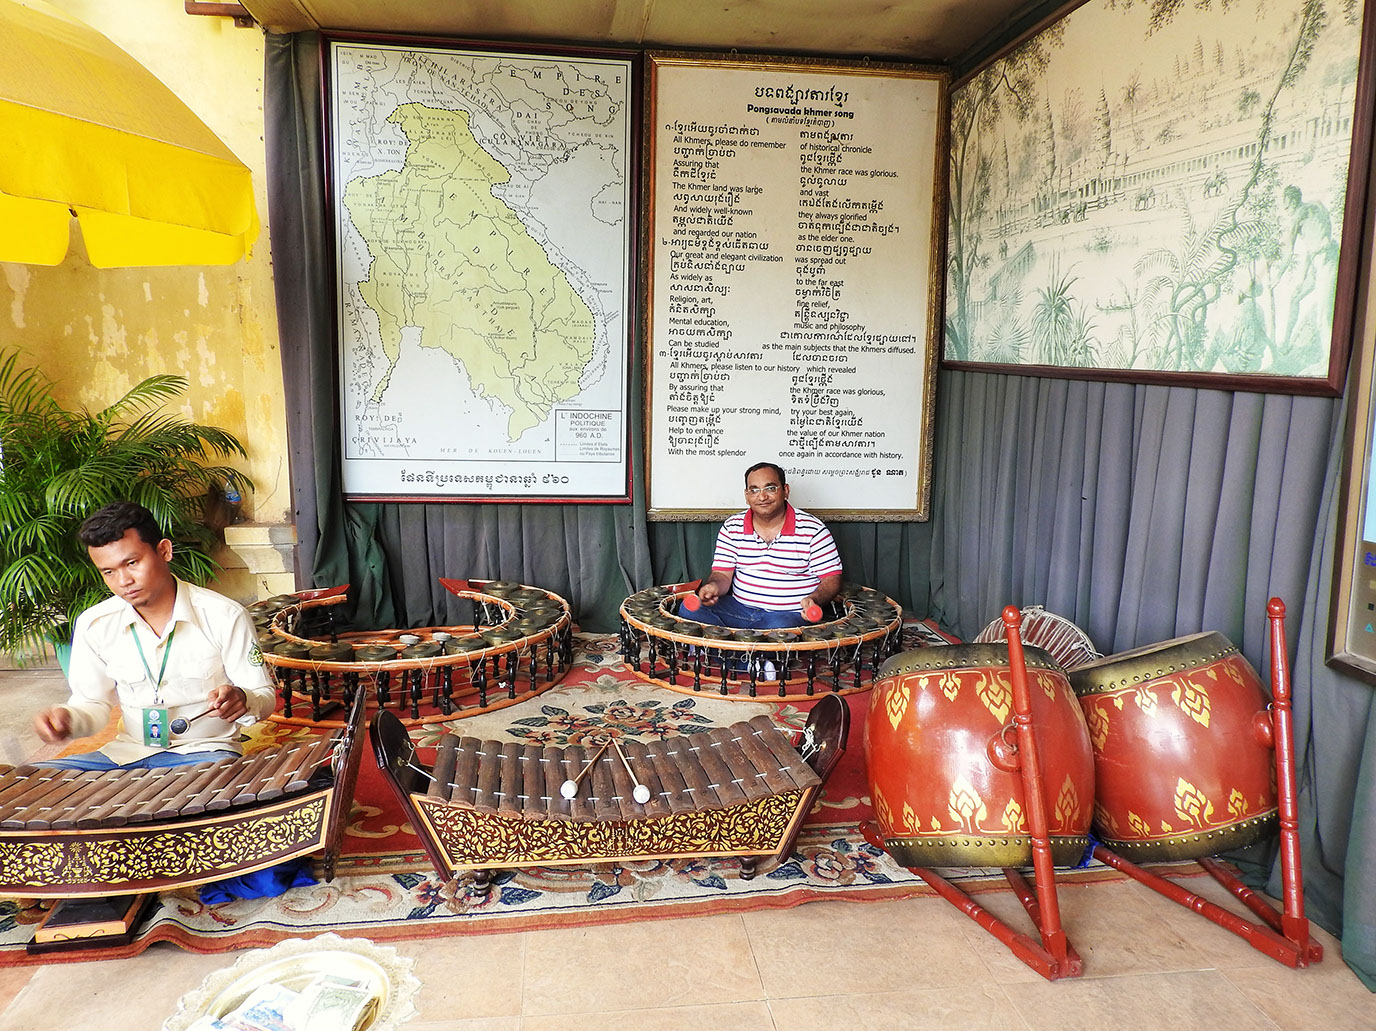 Devang trying his hands on one of the traditional Cambodian musical instruments inside the Royal Palace